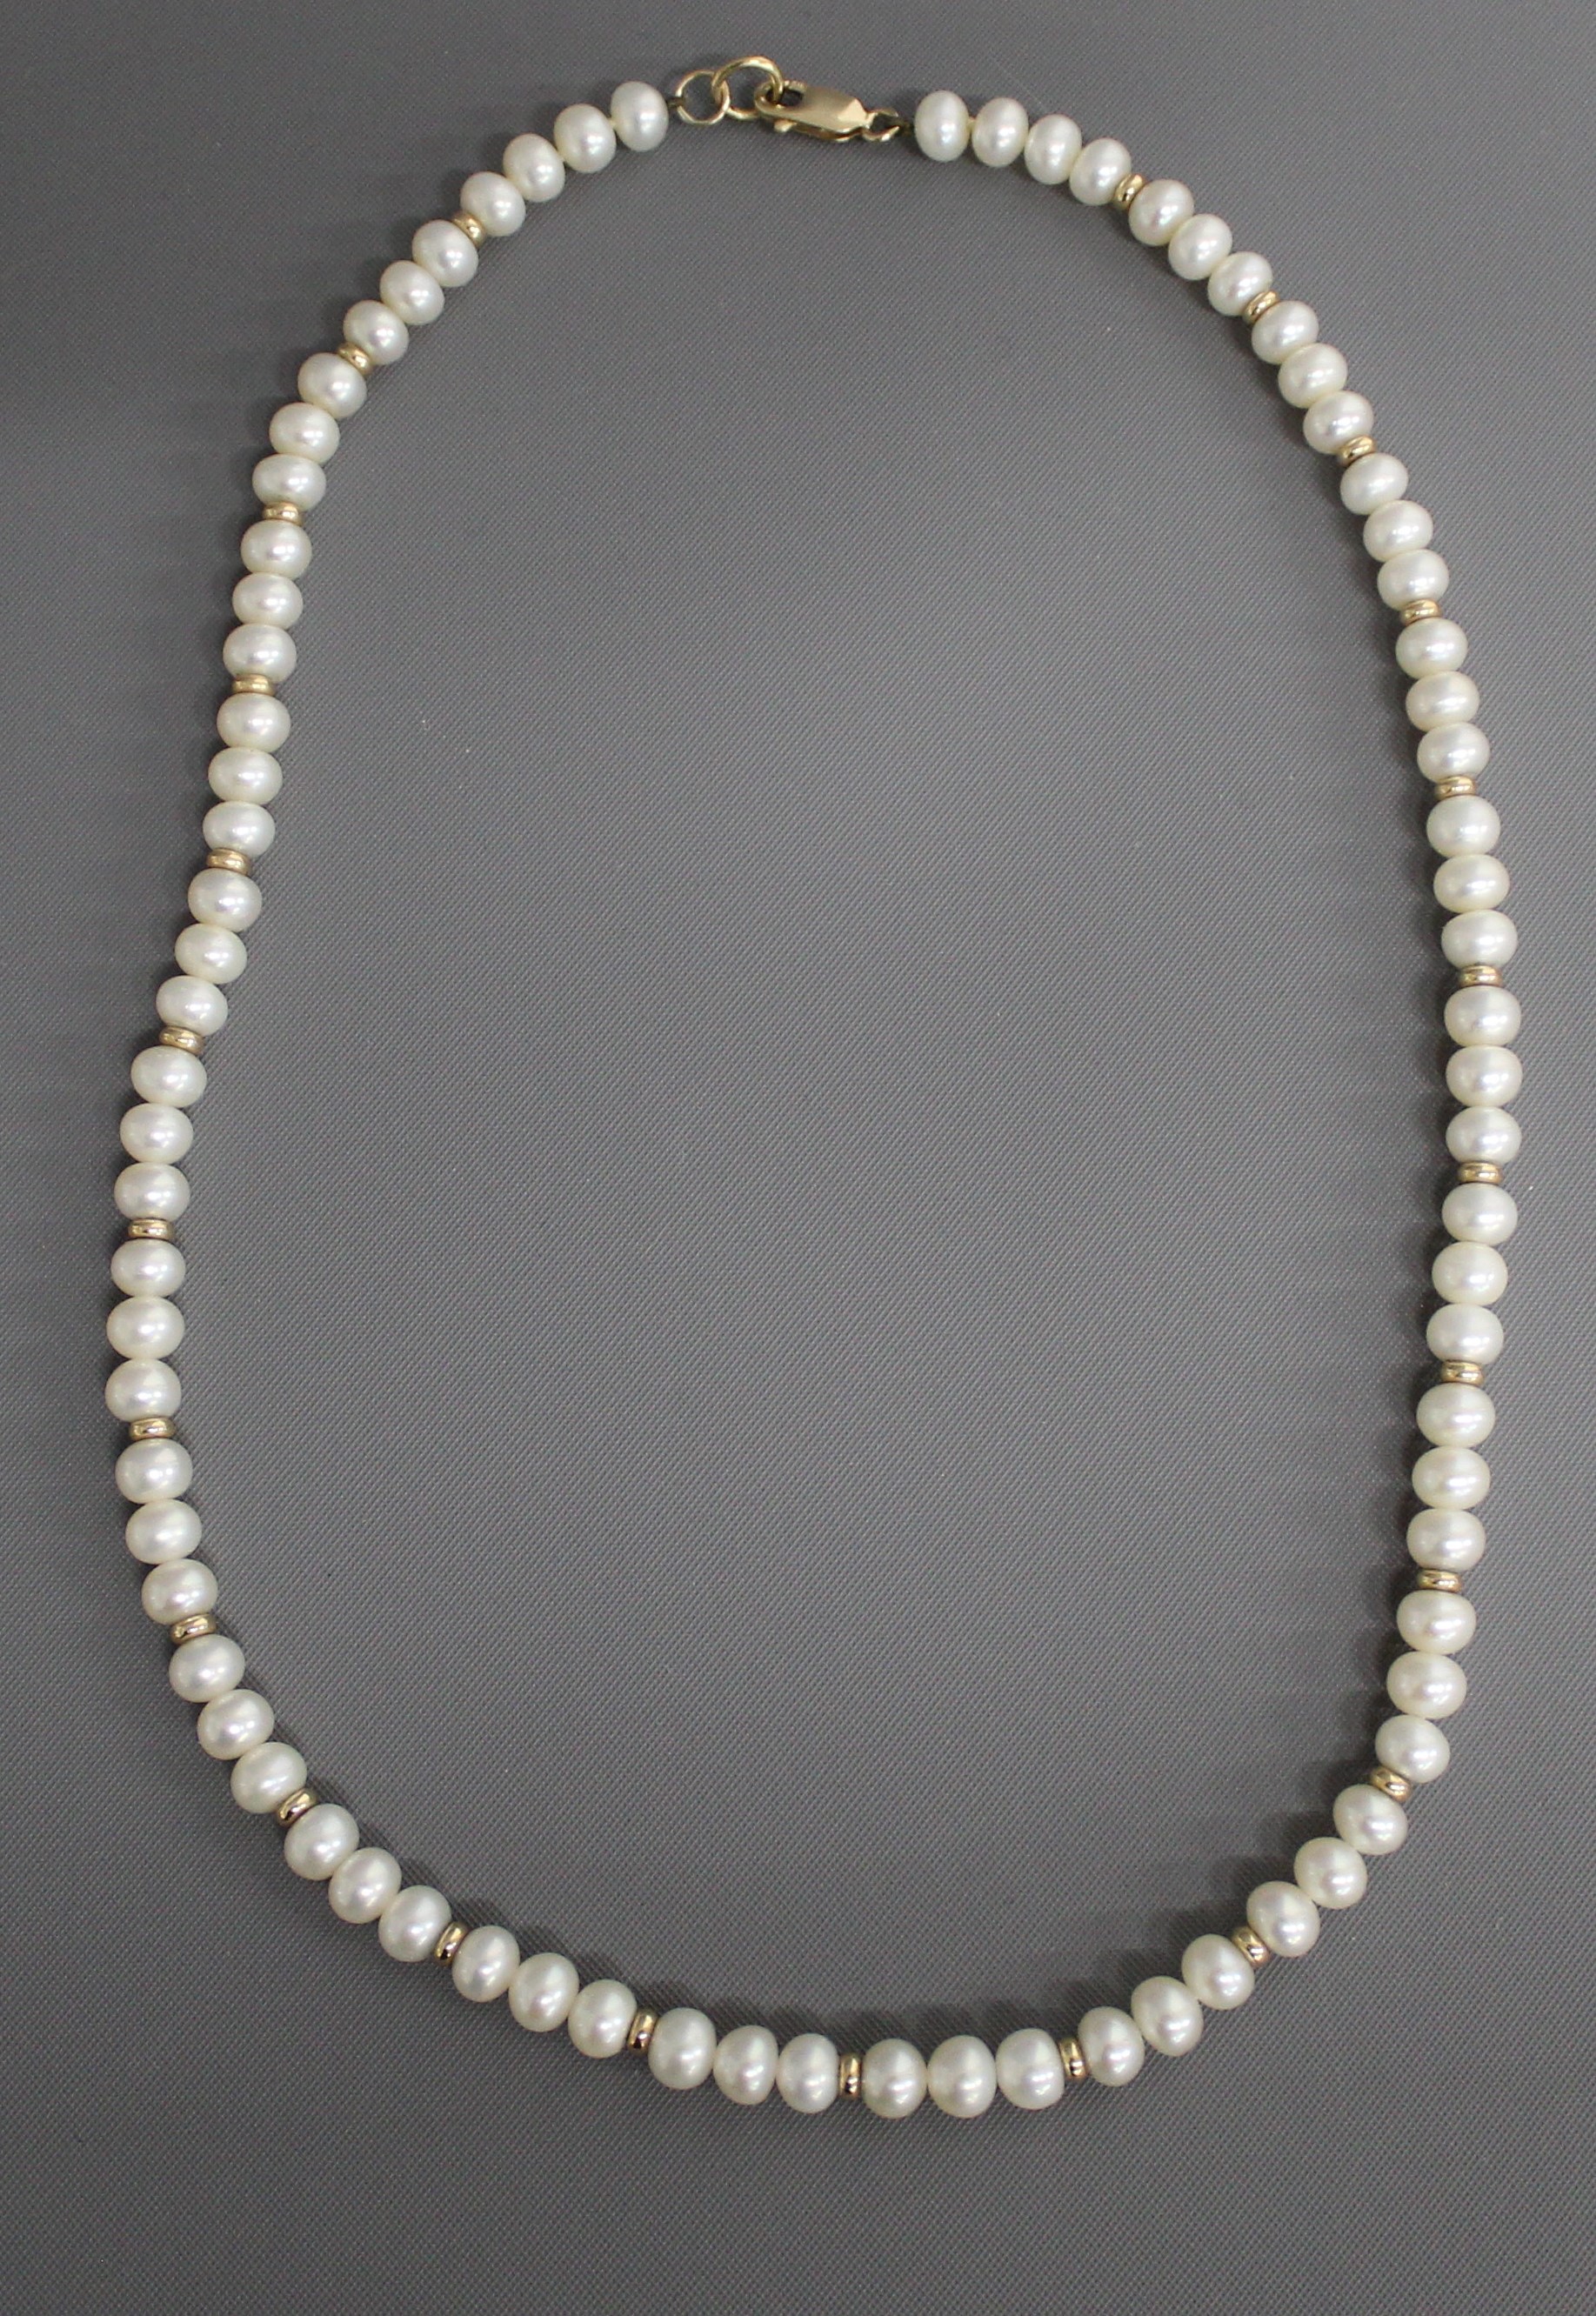 Cultured pearl & 9ct gold necklace - Image 3 of 3